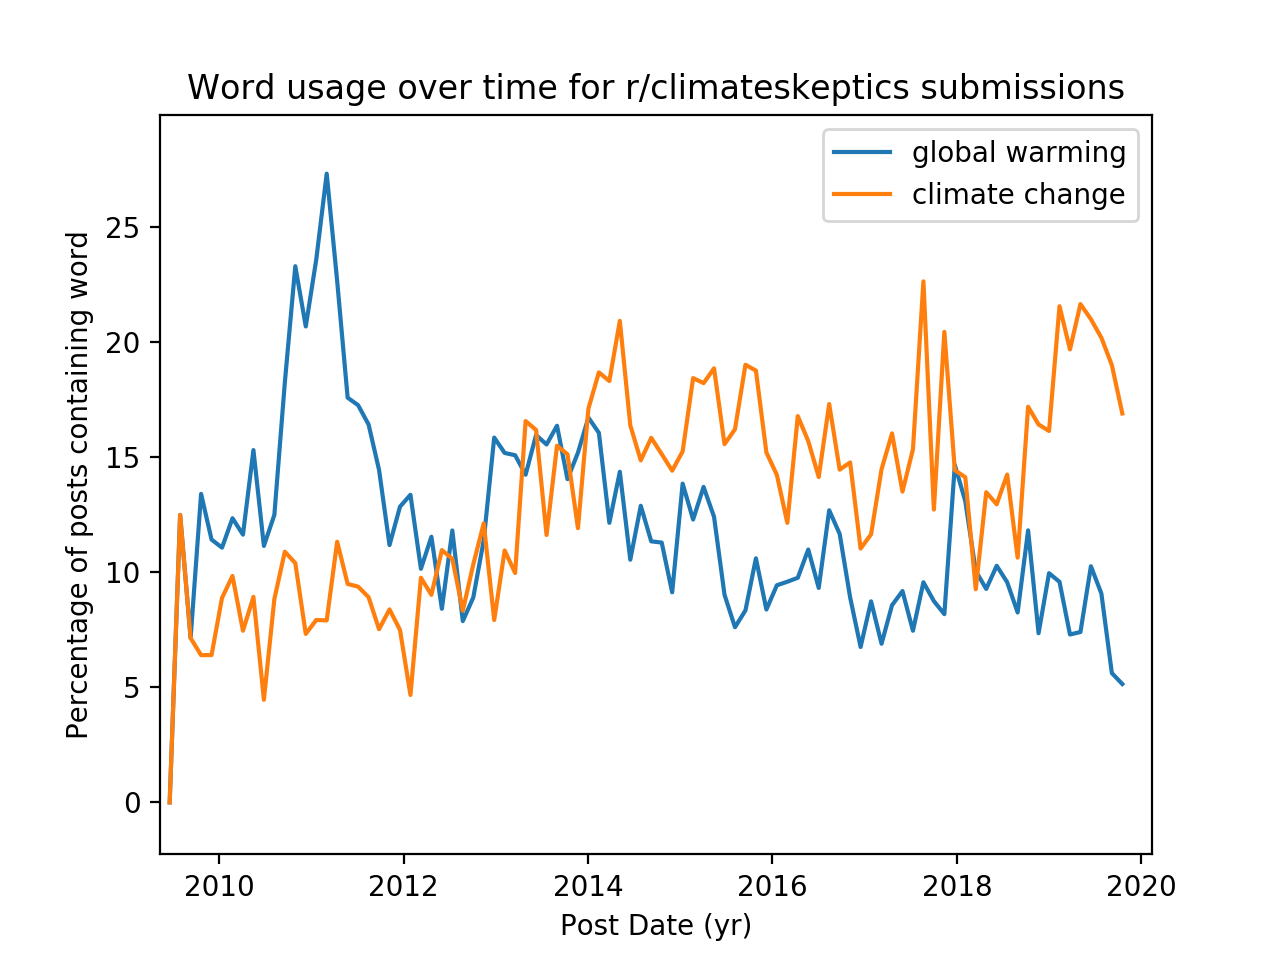 Submissions in the subreddit r/climateskeptics that mention climate change or global warming